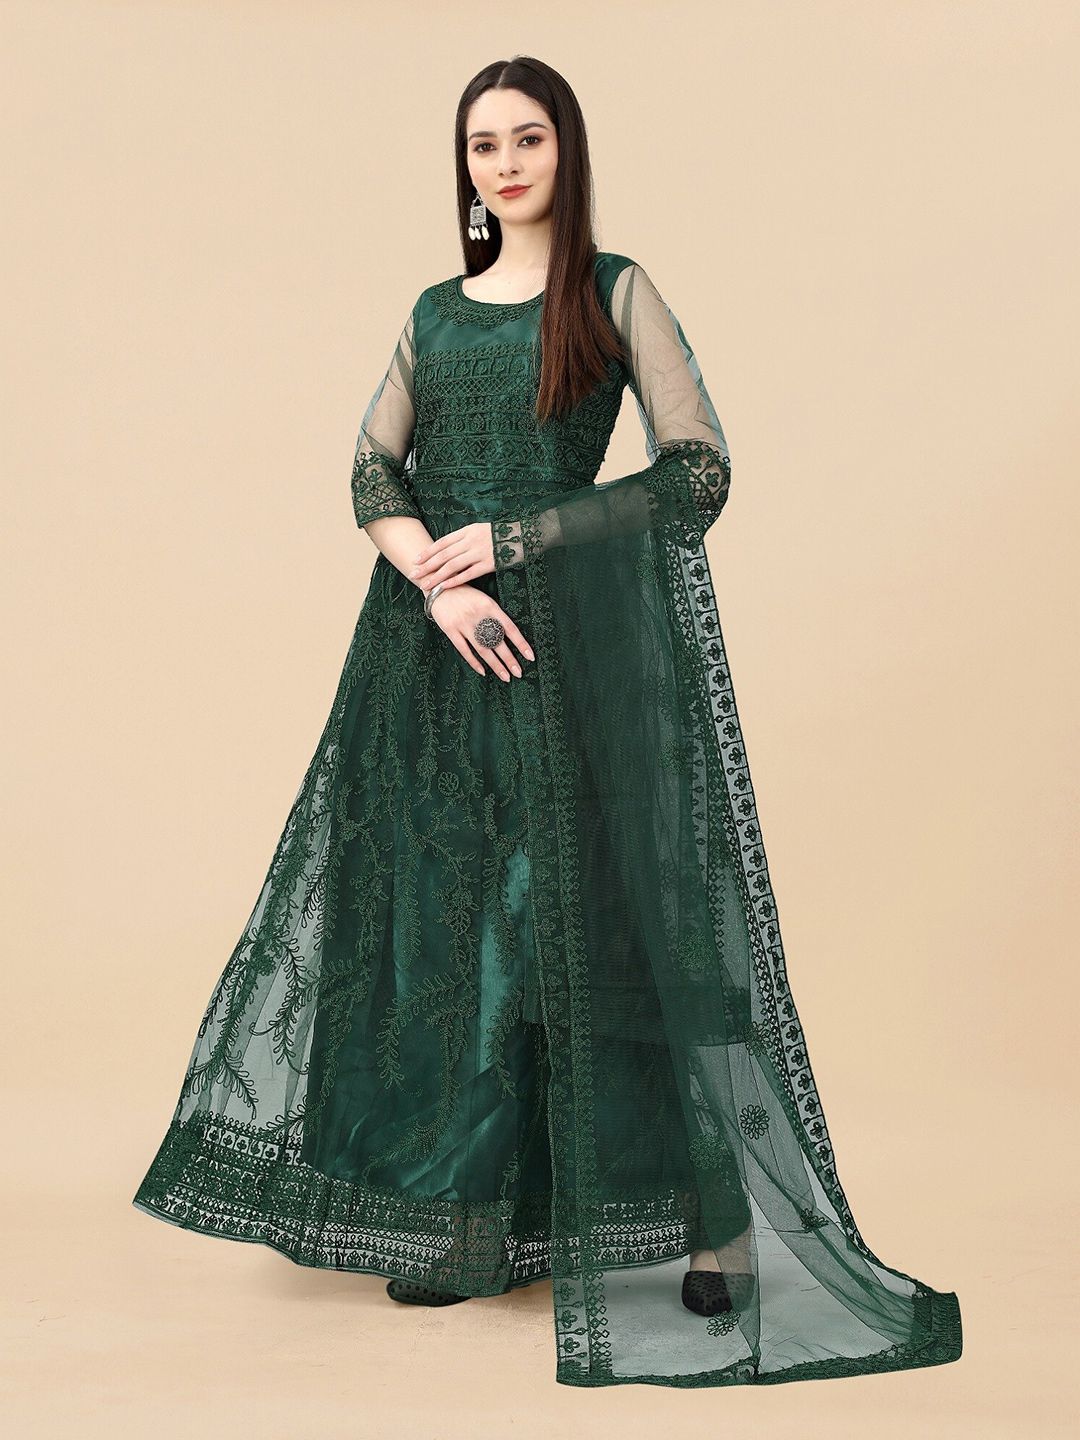 APNISHA Round Neck Ethnic Motifs Embroidered Semi-Stitched Gown Dress Price in India